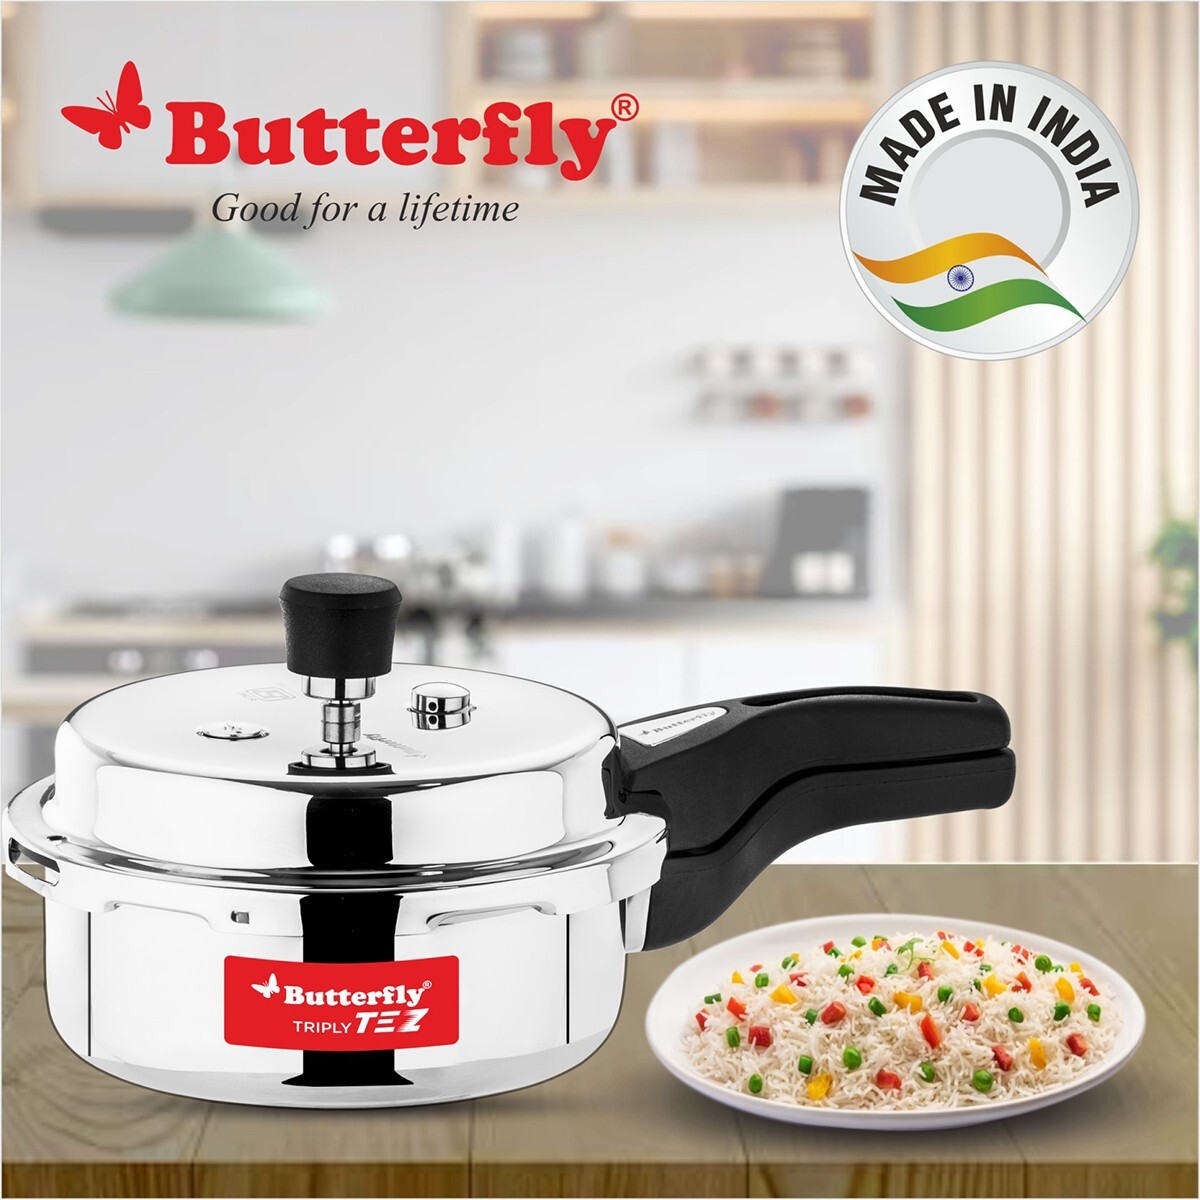 Butterfly Tez Olc Triply Pressure Cooker 2L